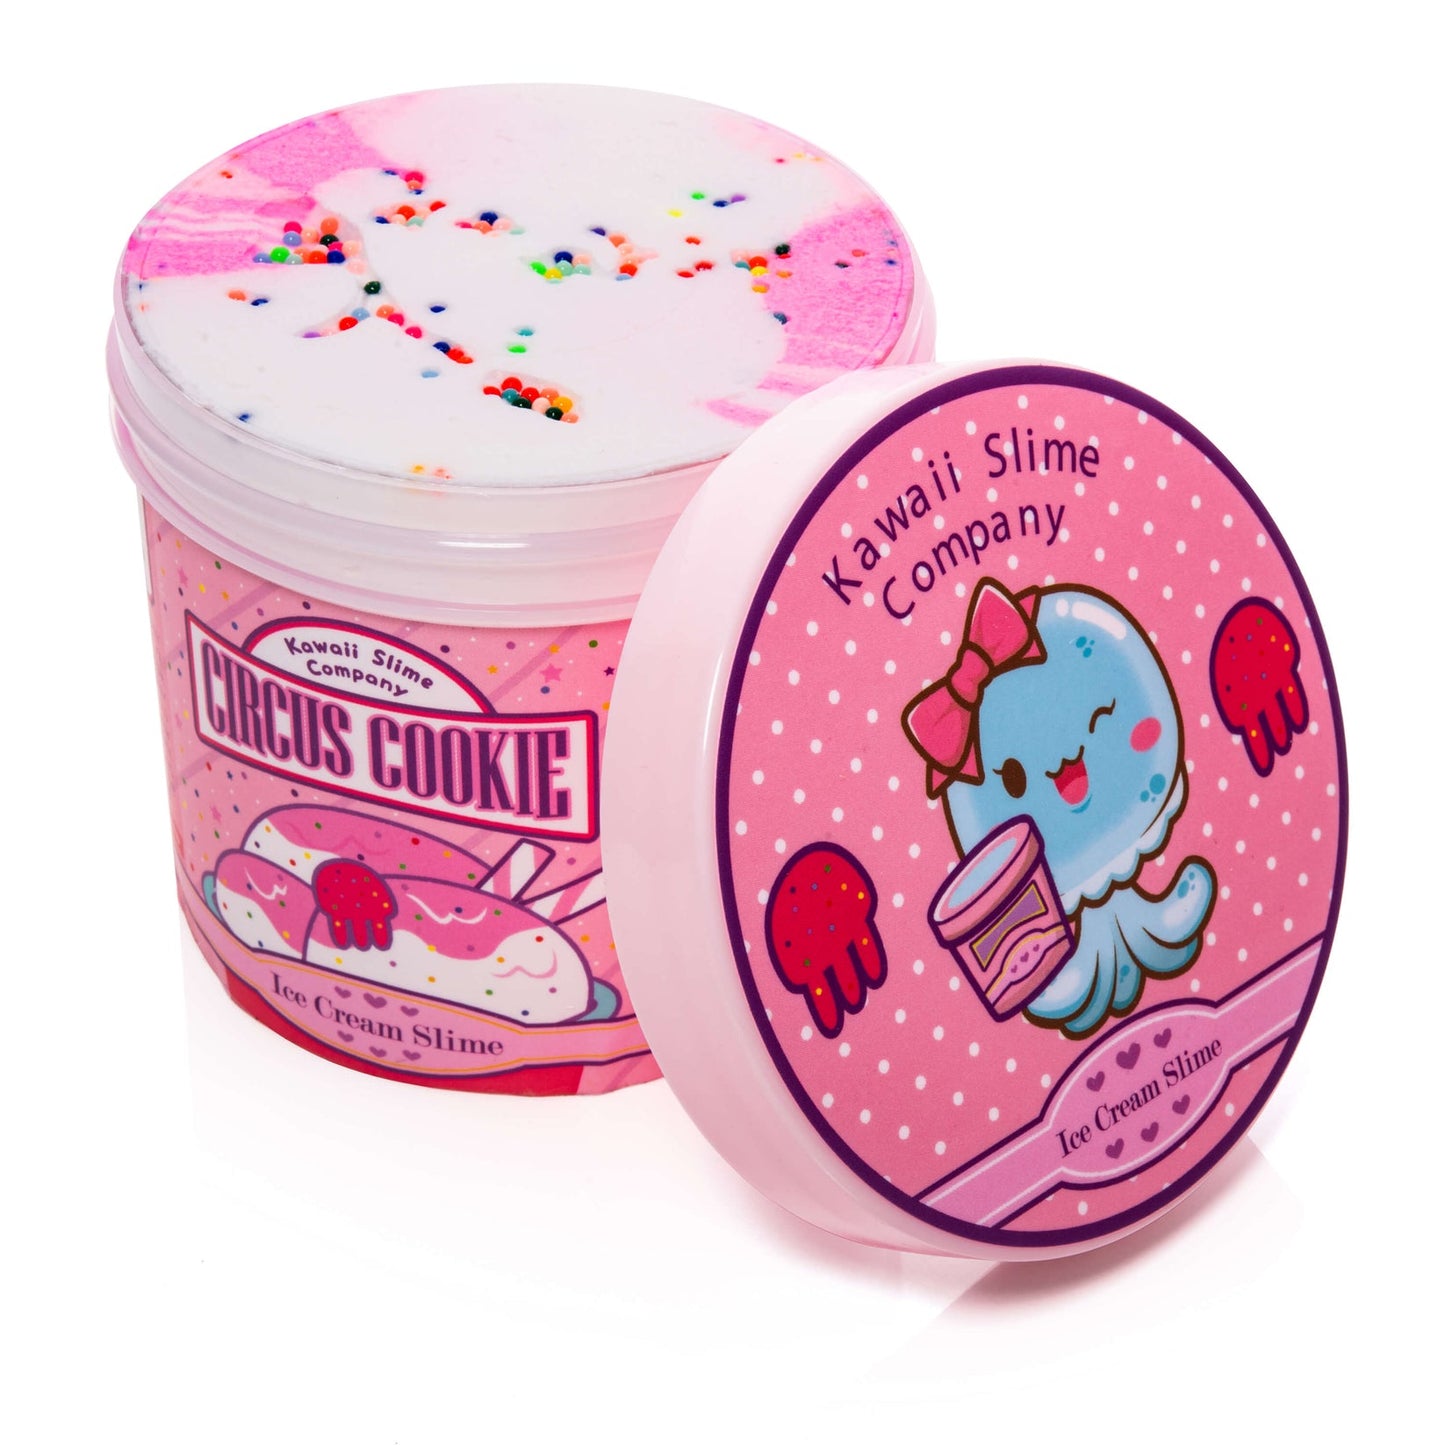 Circus Cookie Scented Ice Cream Pint Slime